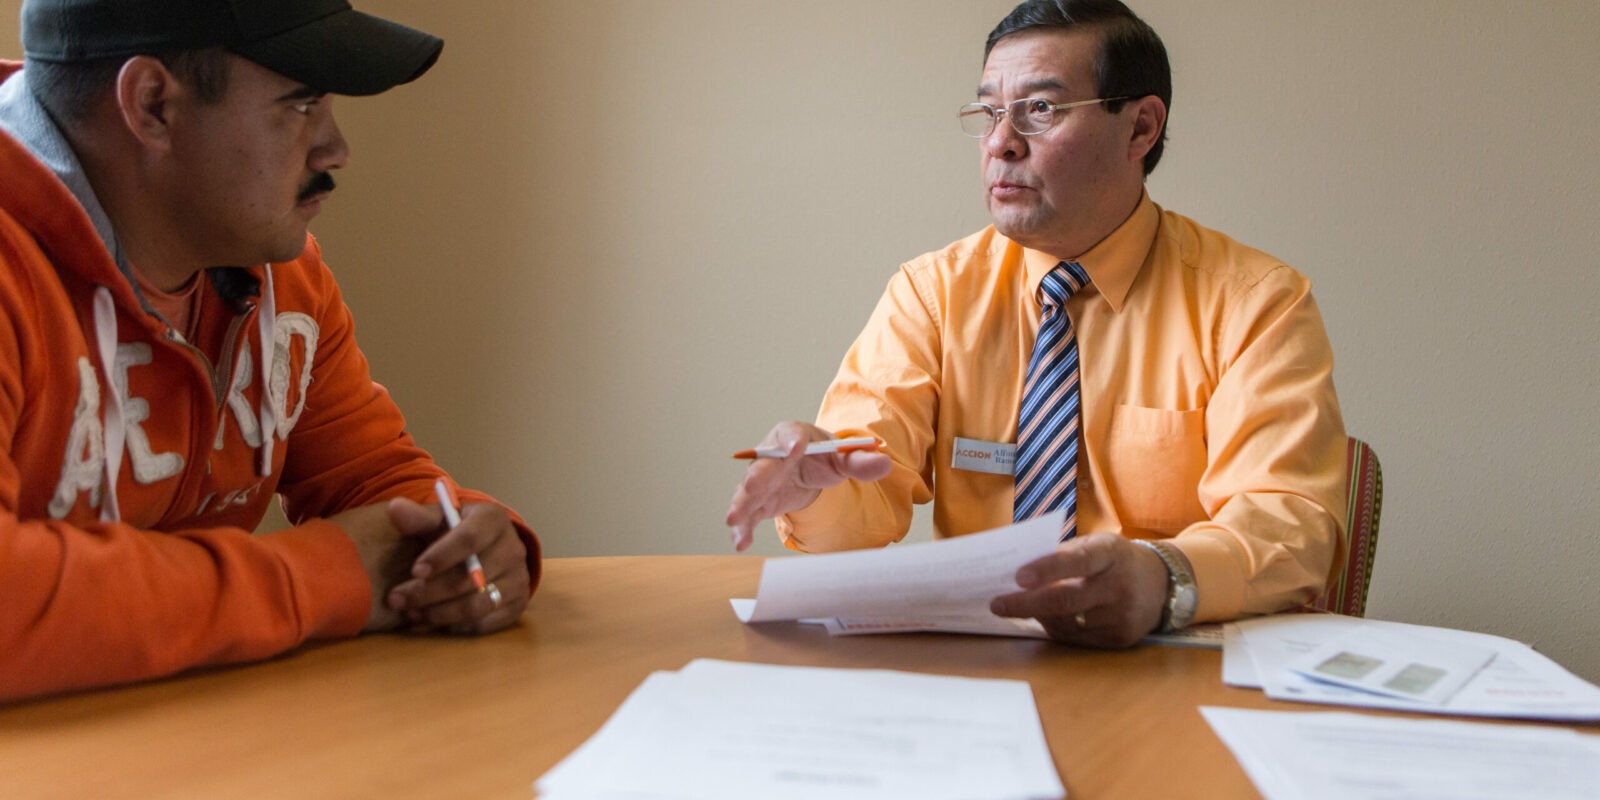 Manuel Baray goes over paperwork completing a loan for his transportation business with Accion representative, Alfonso Ramos.